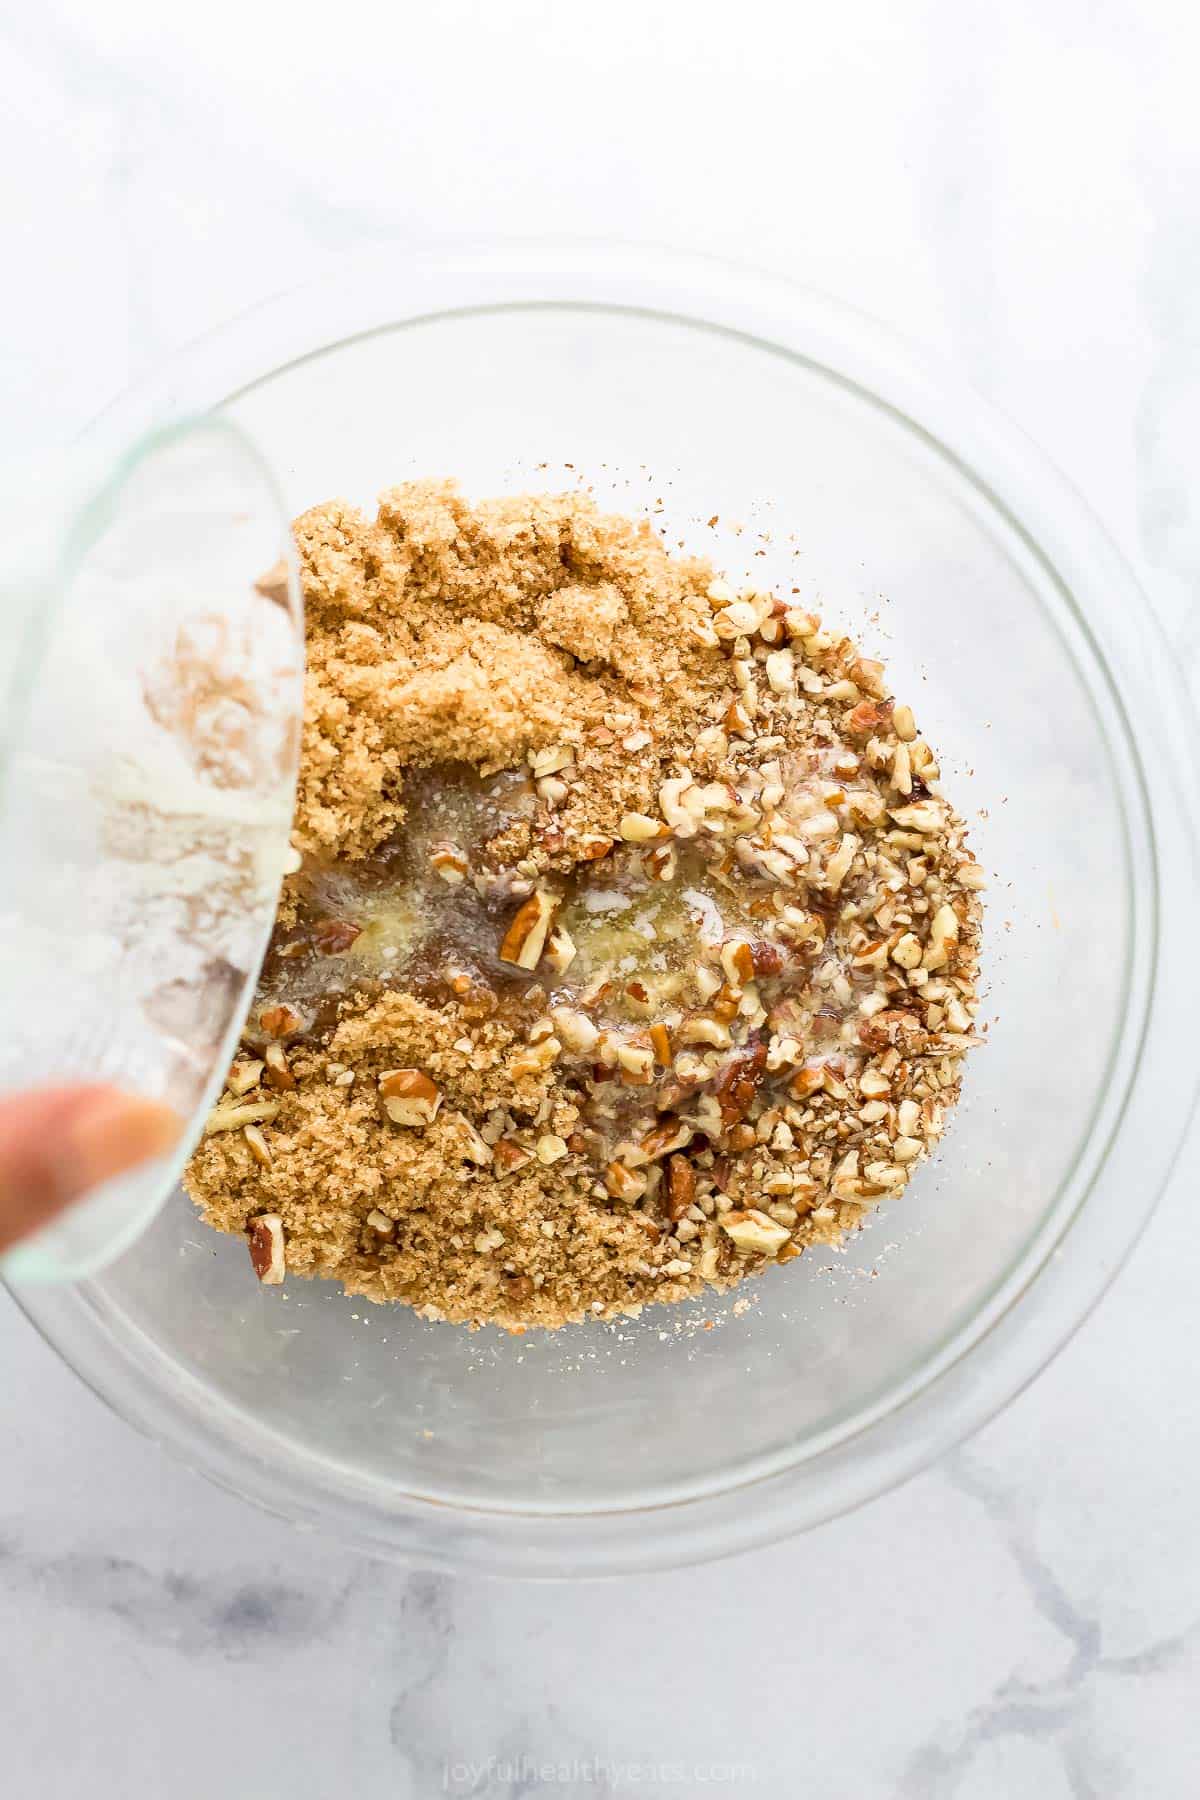 Melted butter being poured into a glass bowl containing chopped pecans, brown sugar and cinnamon